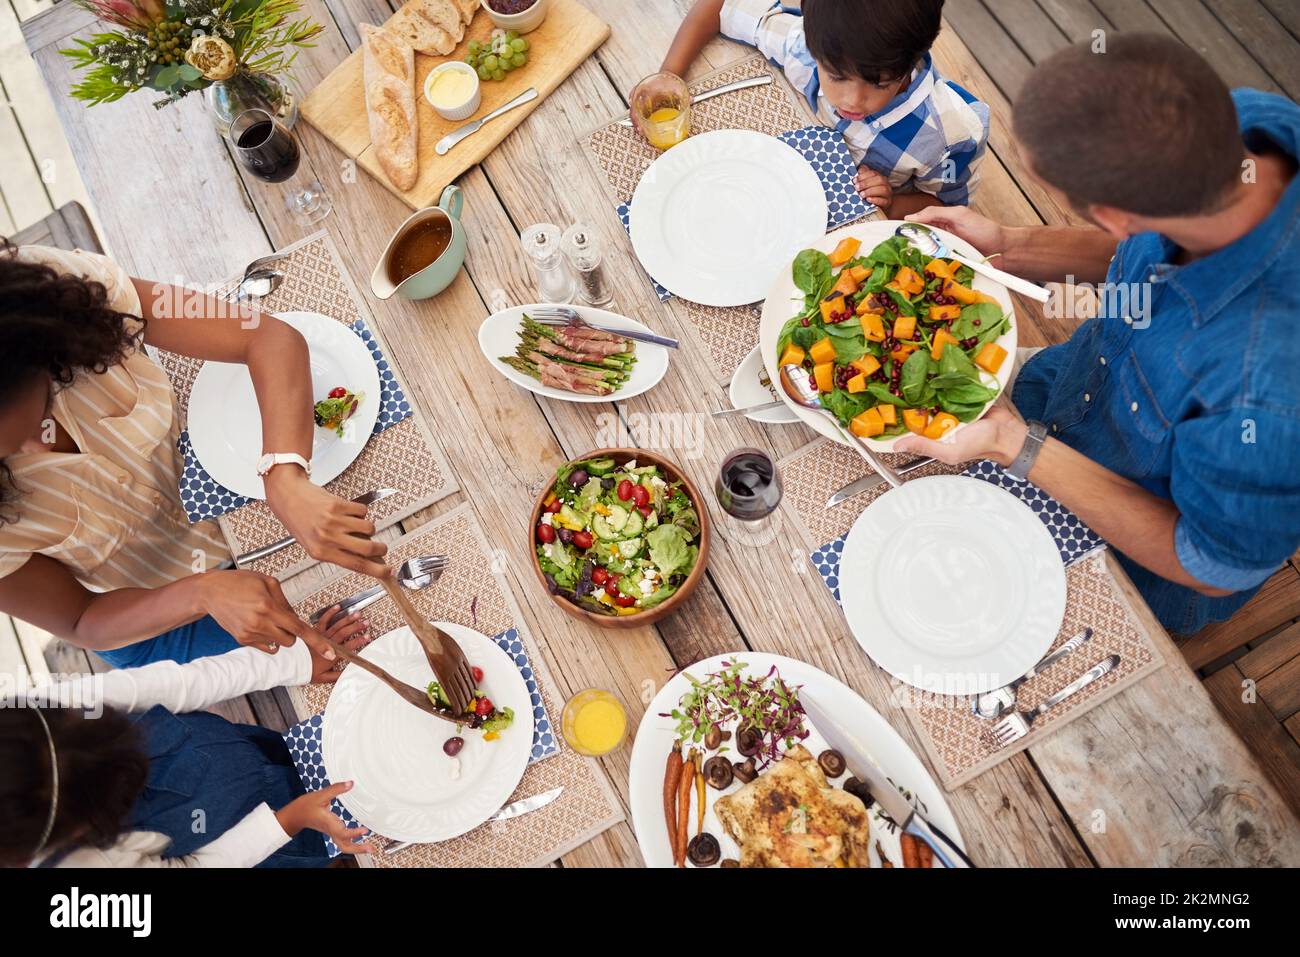 Serving love and happiness with every meal. High angle shot of a young family of four enjoying a meal together around a table outdoors. Stock Photo